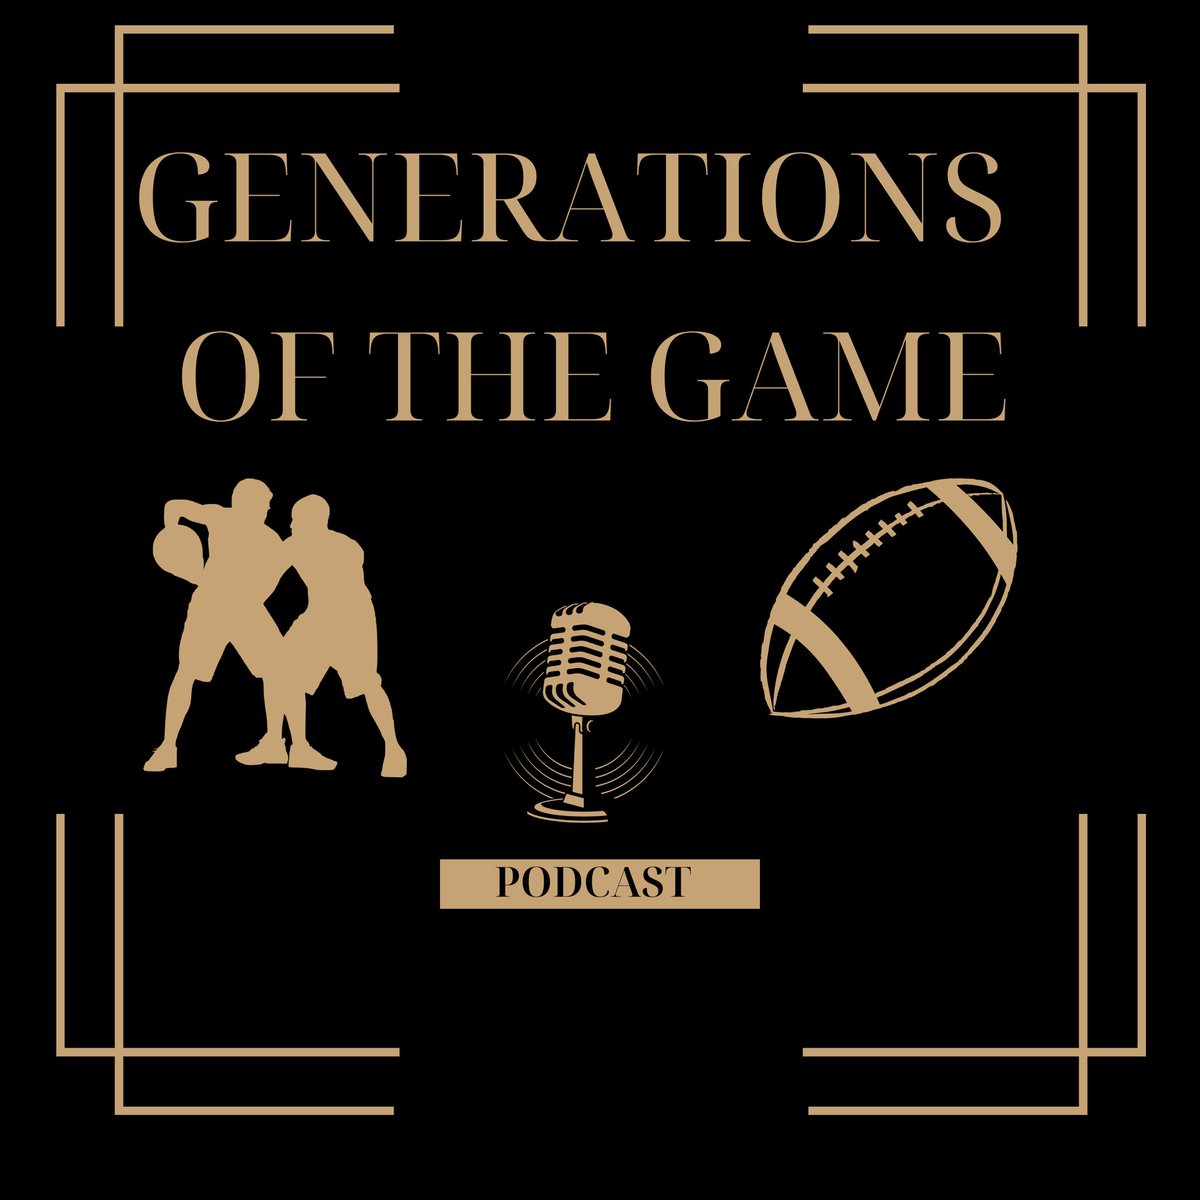 #GenerationsOfTheGamePodcast Episode 21 is live now. We are joined by friend of the show Jonathan Johnson, Jackson-Reed (DC) Boys Track Coach Tia Clemmons and 1996 Olympic Gold Medalist LaMont Smith to discuss the 2024 #PennRelays and more. Tap in 

youtu.be/OIdAQSy0PWU?si…